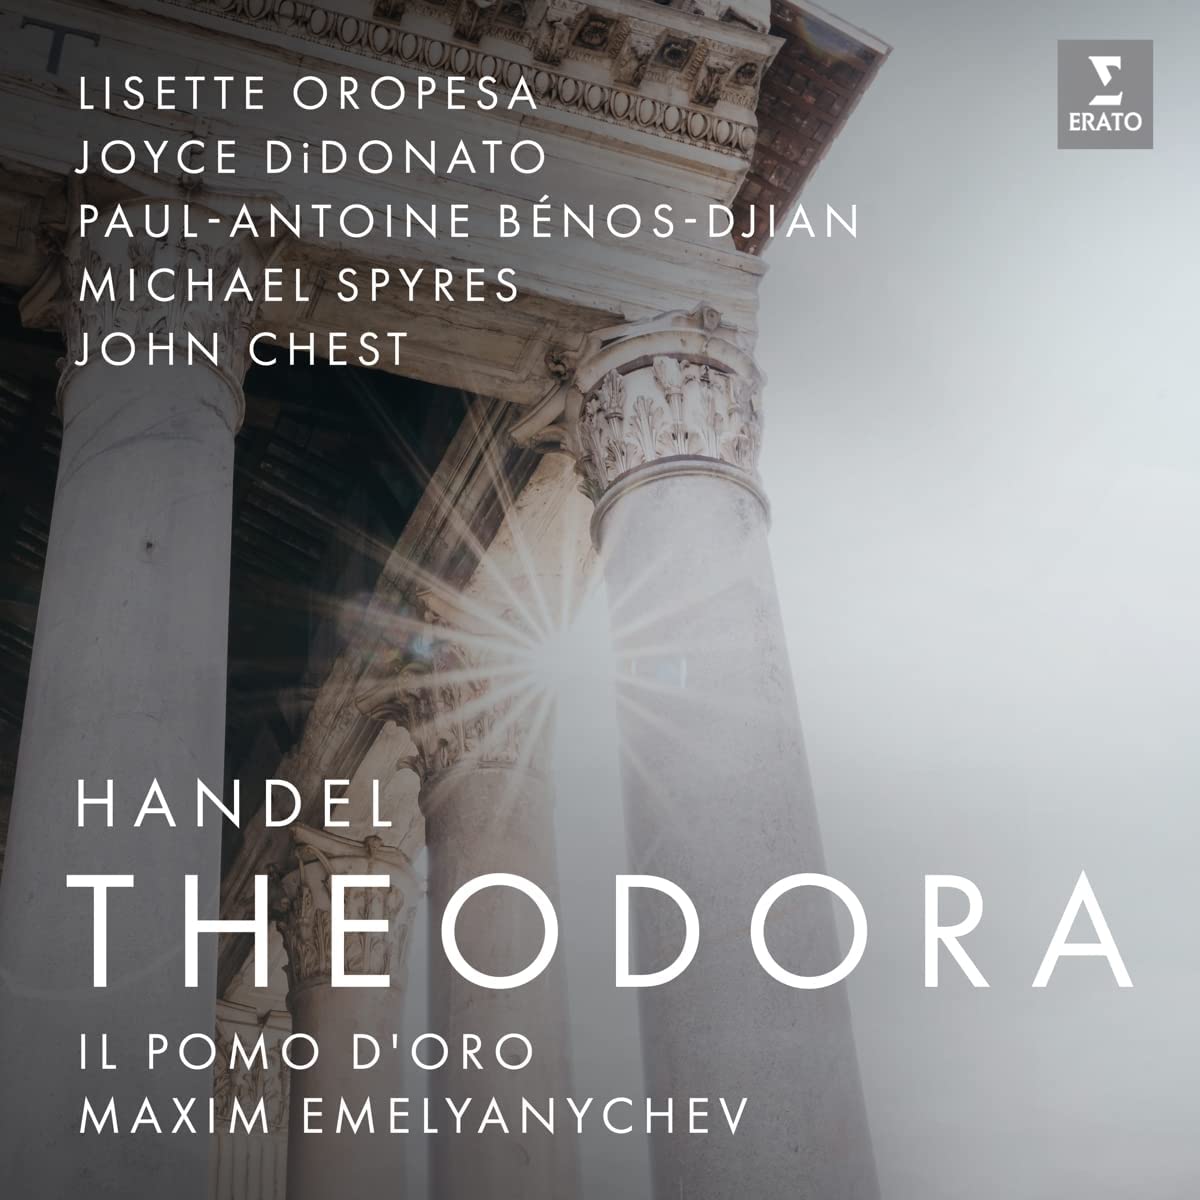 💿 New heads-up about #Thedora starring @Lisette_Oropesa in the title-role! 💿 

The @WarnerClassics CD of #Handel’s dramatic oratorio will be released on October28!

You can pre-order it with an IGT track from today! 

@ilpdo
#MaximEmelyanychev 
warnerclassics.com/release/handel…